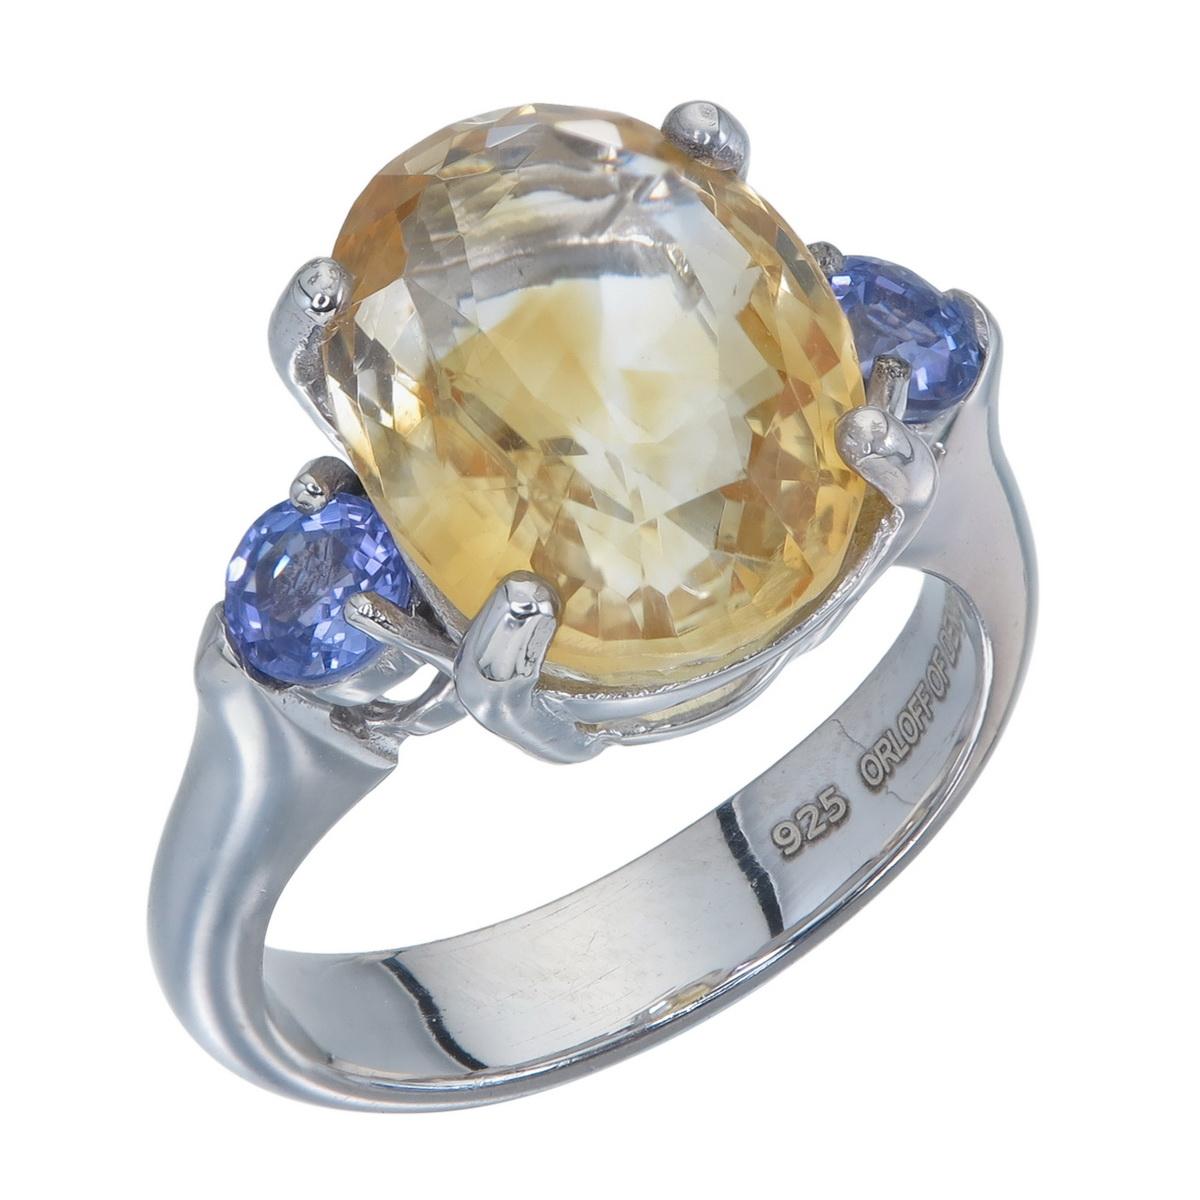 Orloff of Denmark; Large Citrine set with two beautiful blue Tanzanites.

Large yellow Citrine Quartz contrasted wonderfully with two blue & violet Tanzanites set in a 925 Sterling Silver Band.

Tanzanite also know as 'Blue Zoisite' is a stunning